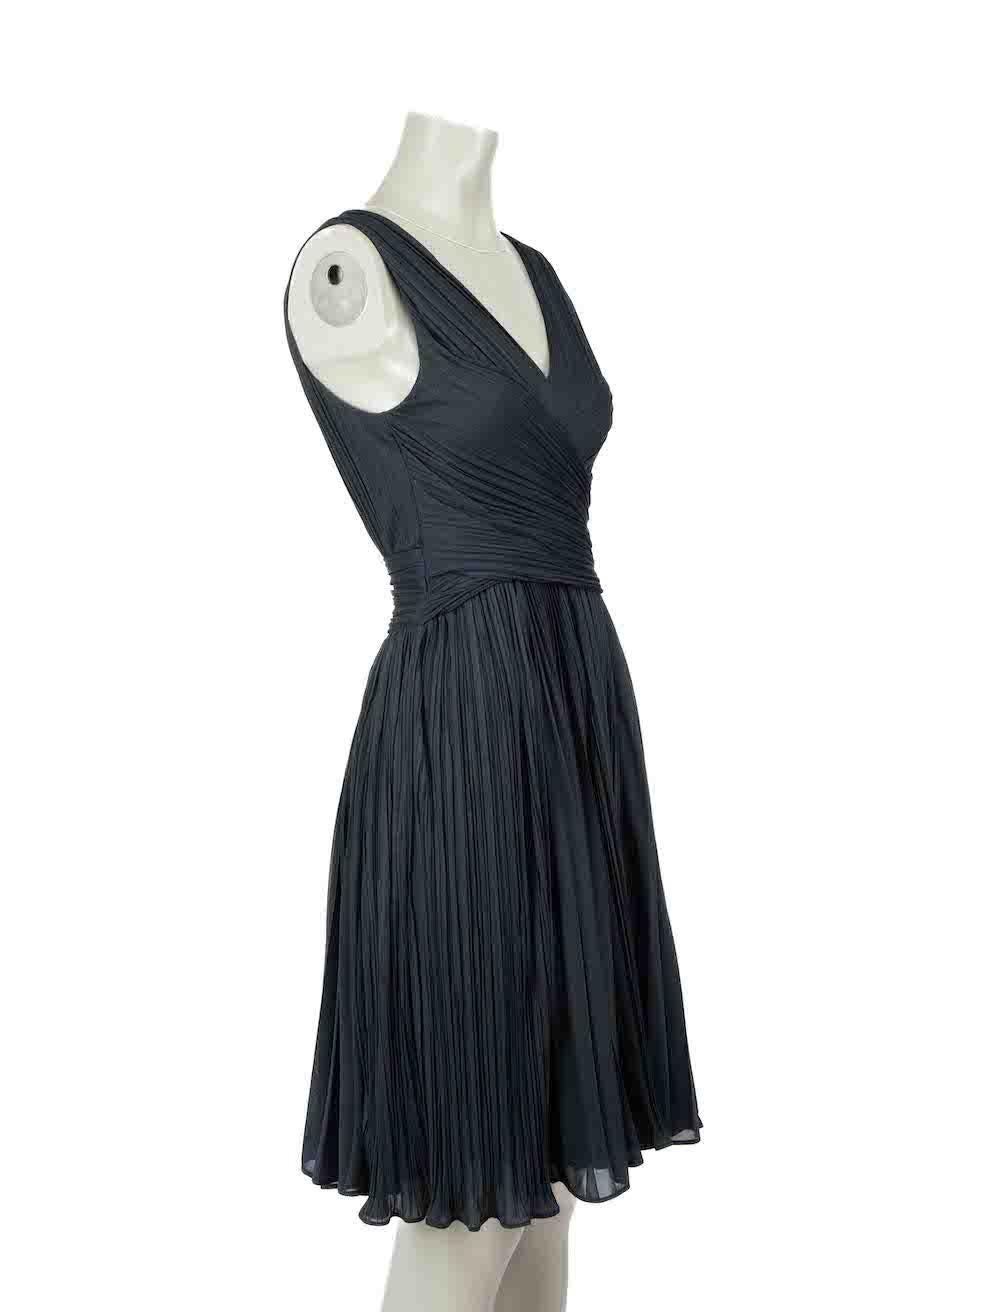 CONDITION is Good. Minor wear to dress is evident. Light wear to fabric composition with a small number of plucks to the weave at the centre back as well as mild discolouration around the neckline interior on this used Halston Heritage designer